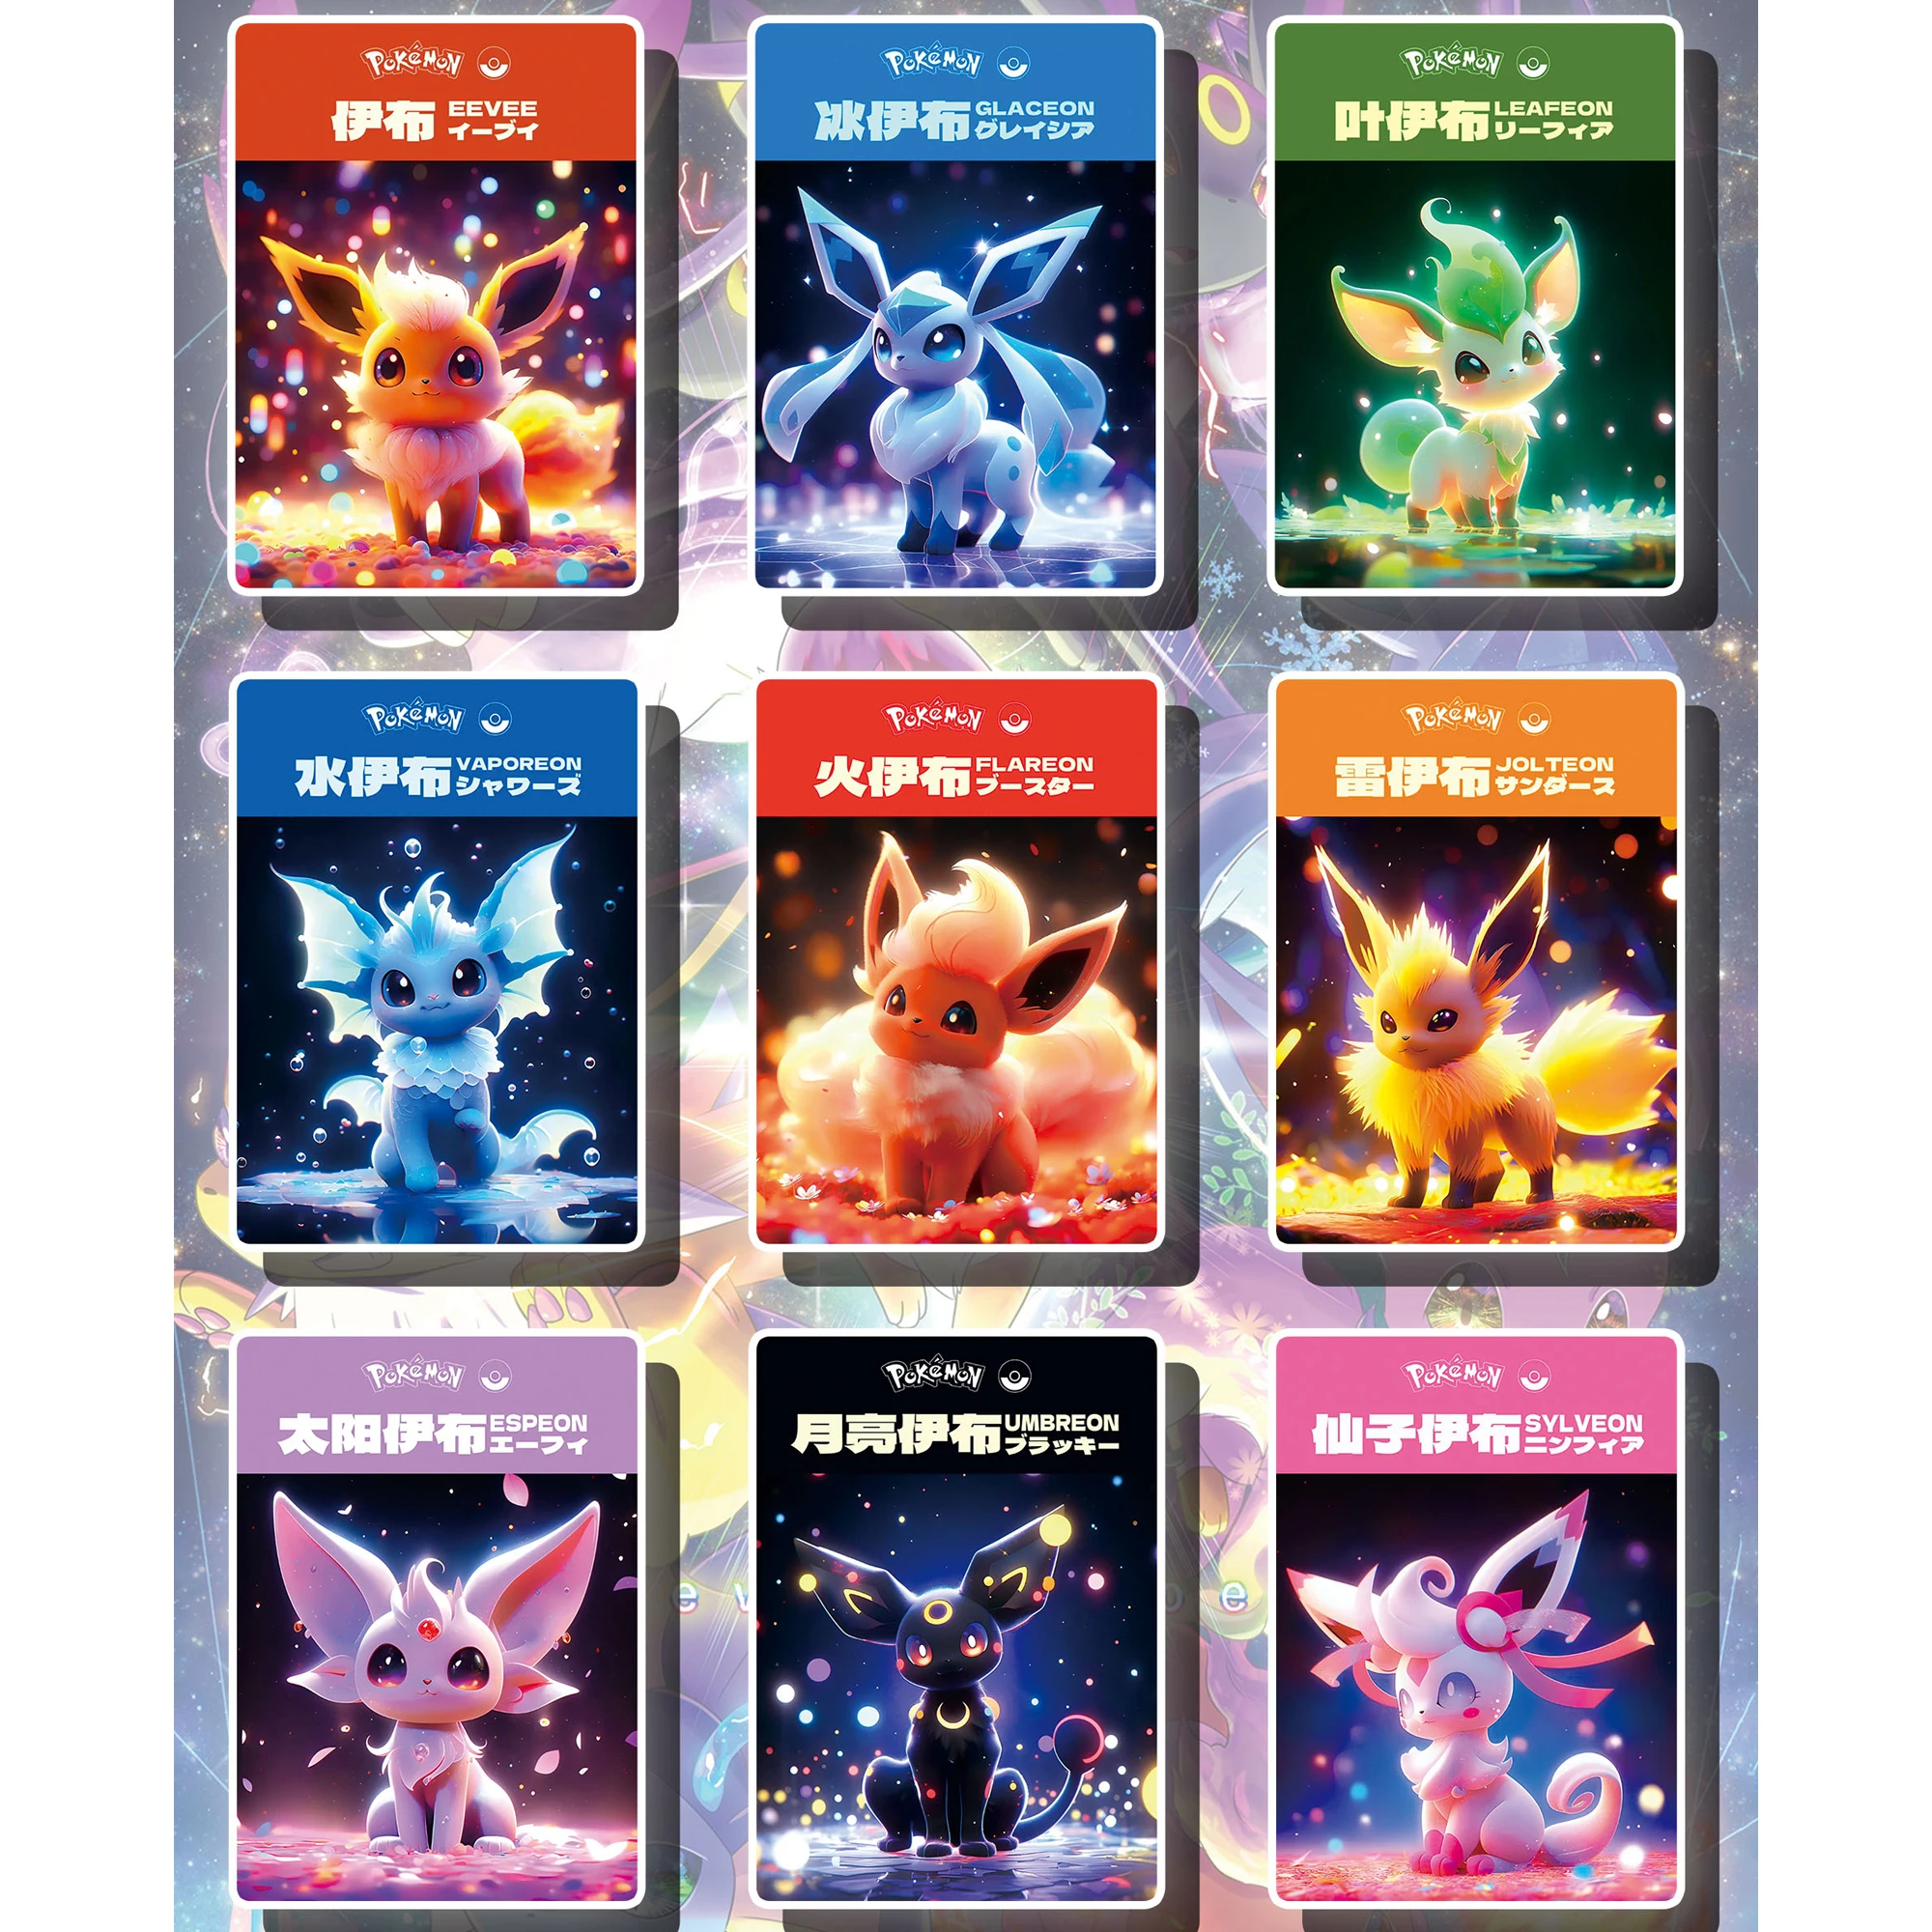 

9Pcs/set New Pokemon Eevee Series Color Flash Card Umbreon Sylveon Flareon Classic Game Anime Collection Cards Diy Gift Toys